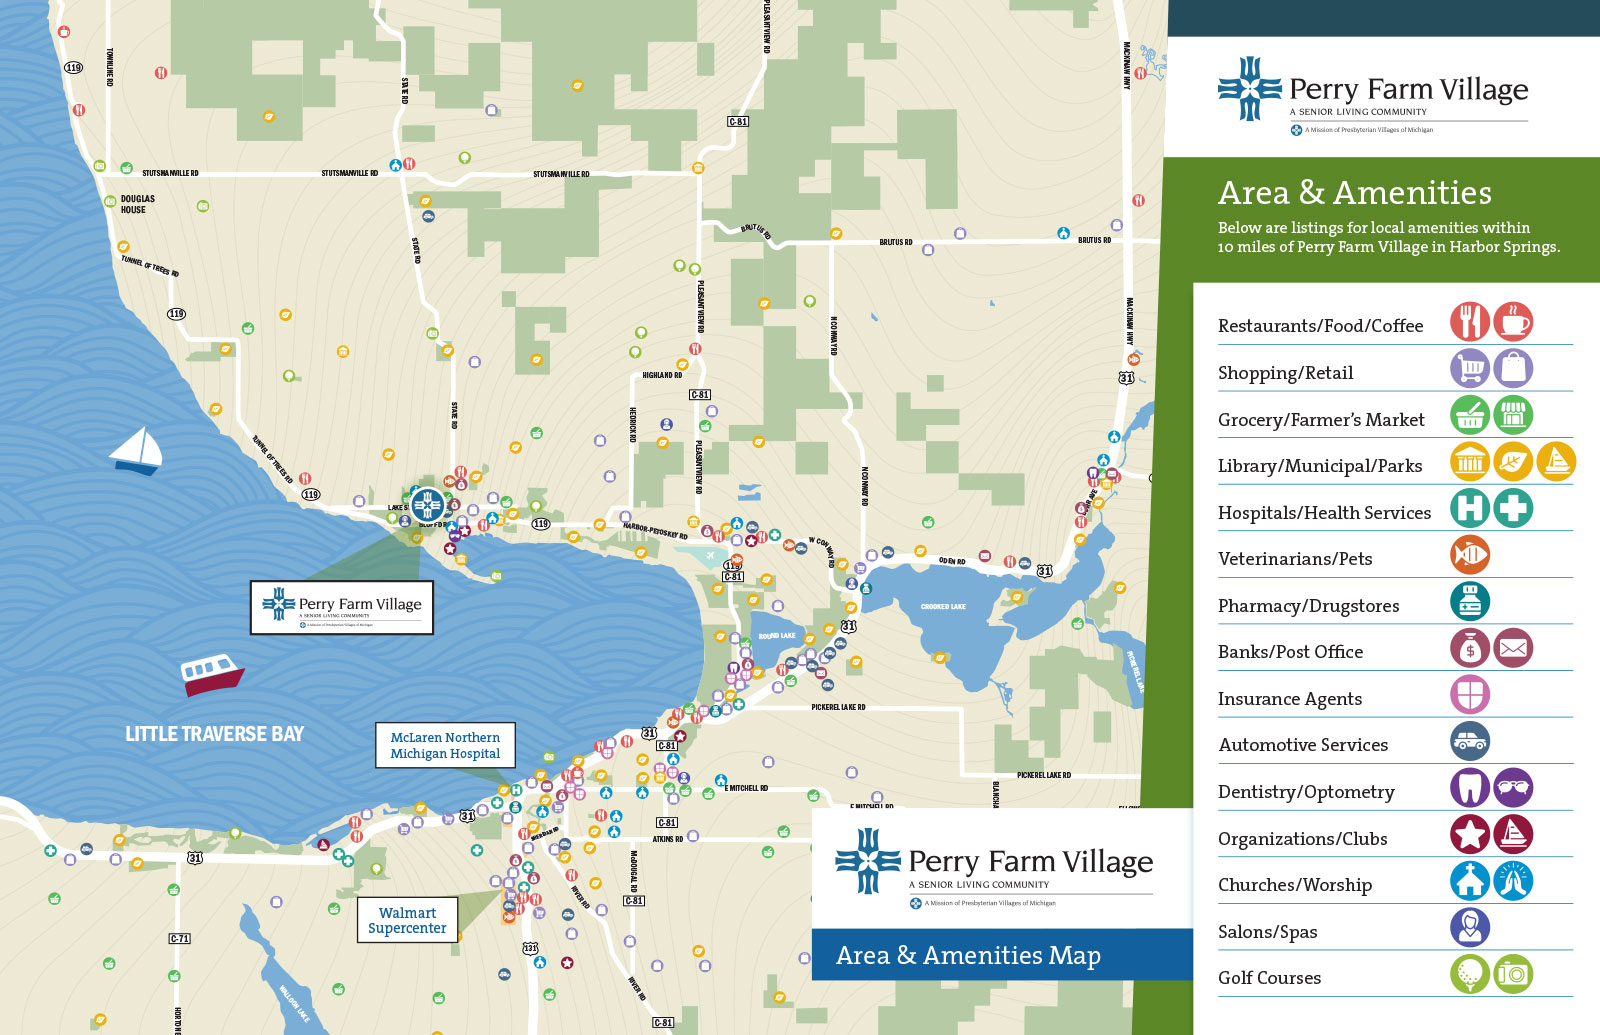 perry farm village amenities map image